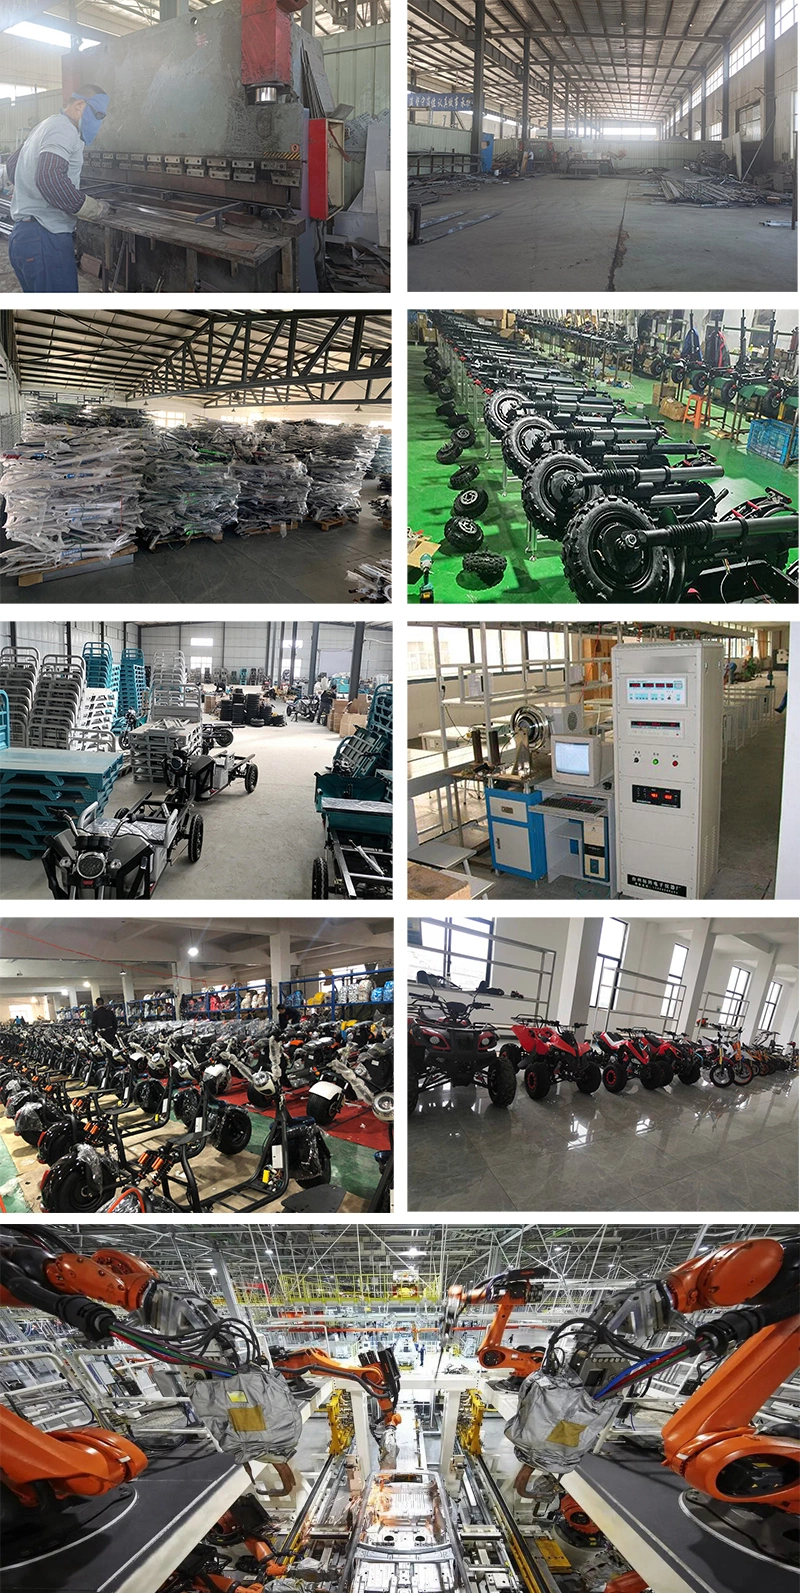 Scooter Disabled for Sale Skate Three Wheel 250W Kids Tricycle Bike 3600W Assembly Line 1200W Offroad Display Electric Scooters